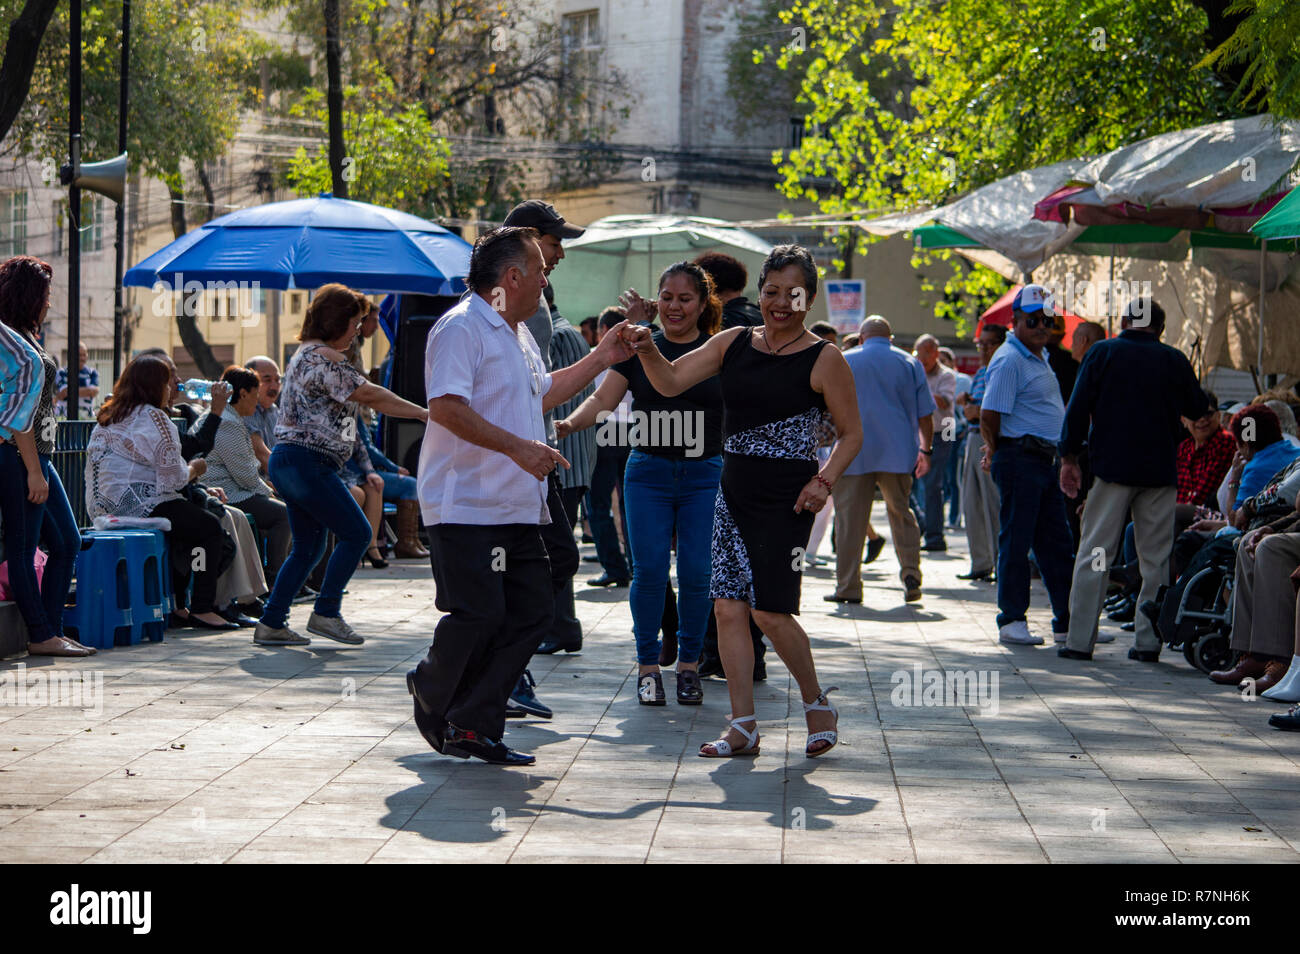 Couples salsa dancing in Alameda Park in Mexico City, Mexico Stock Photo